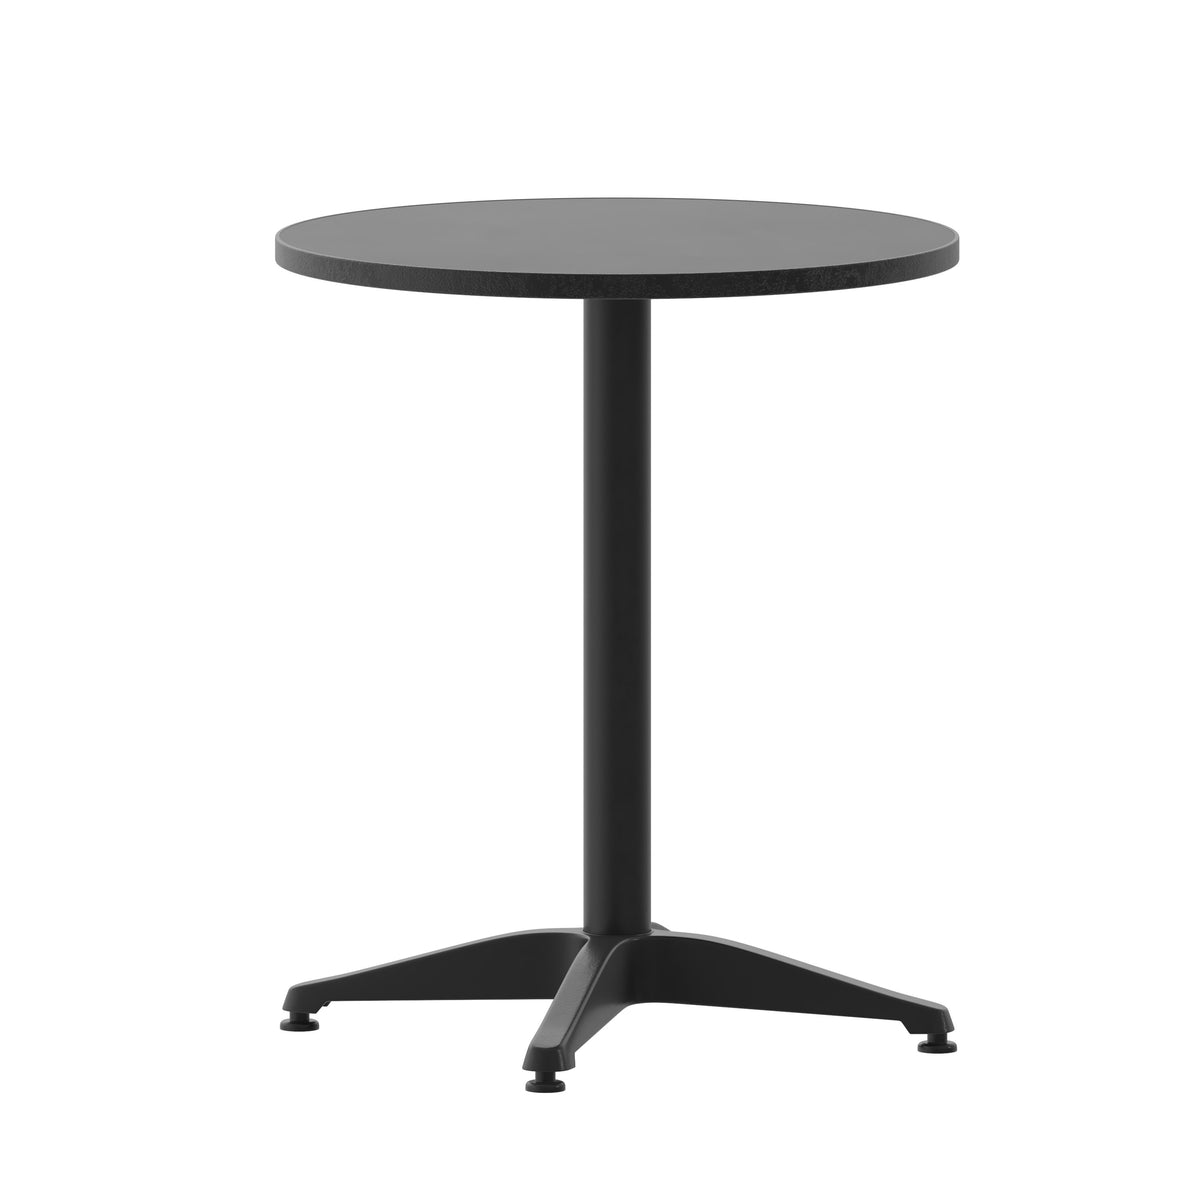 Black |#| Modern 23.5inch Round Glass Framed Glass Table with 2 Black Slat Back Chairs